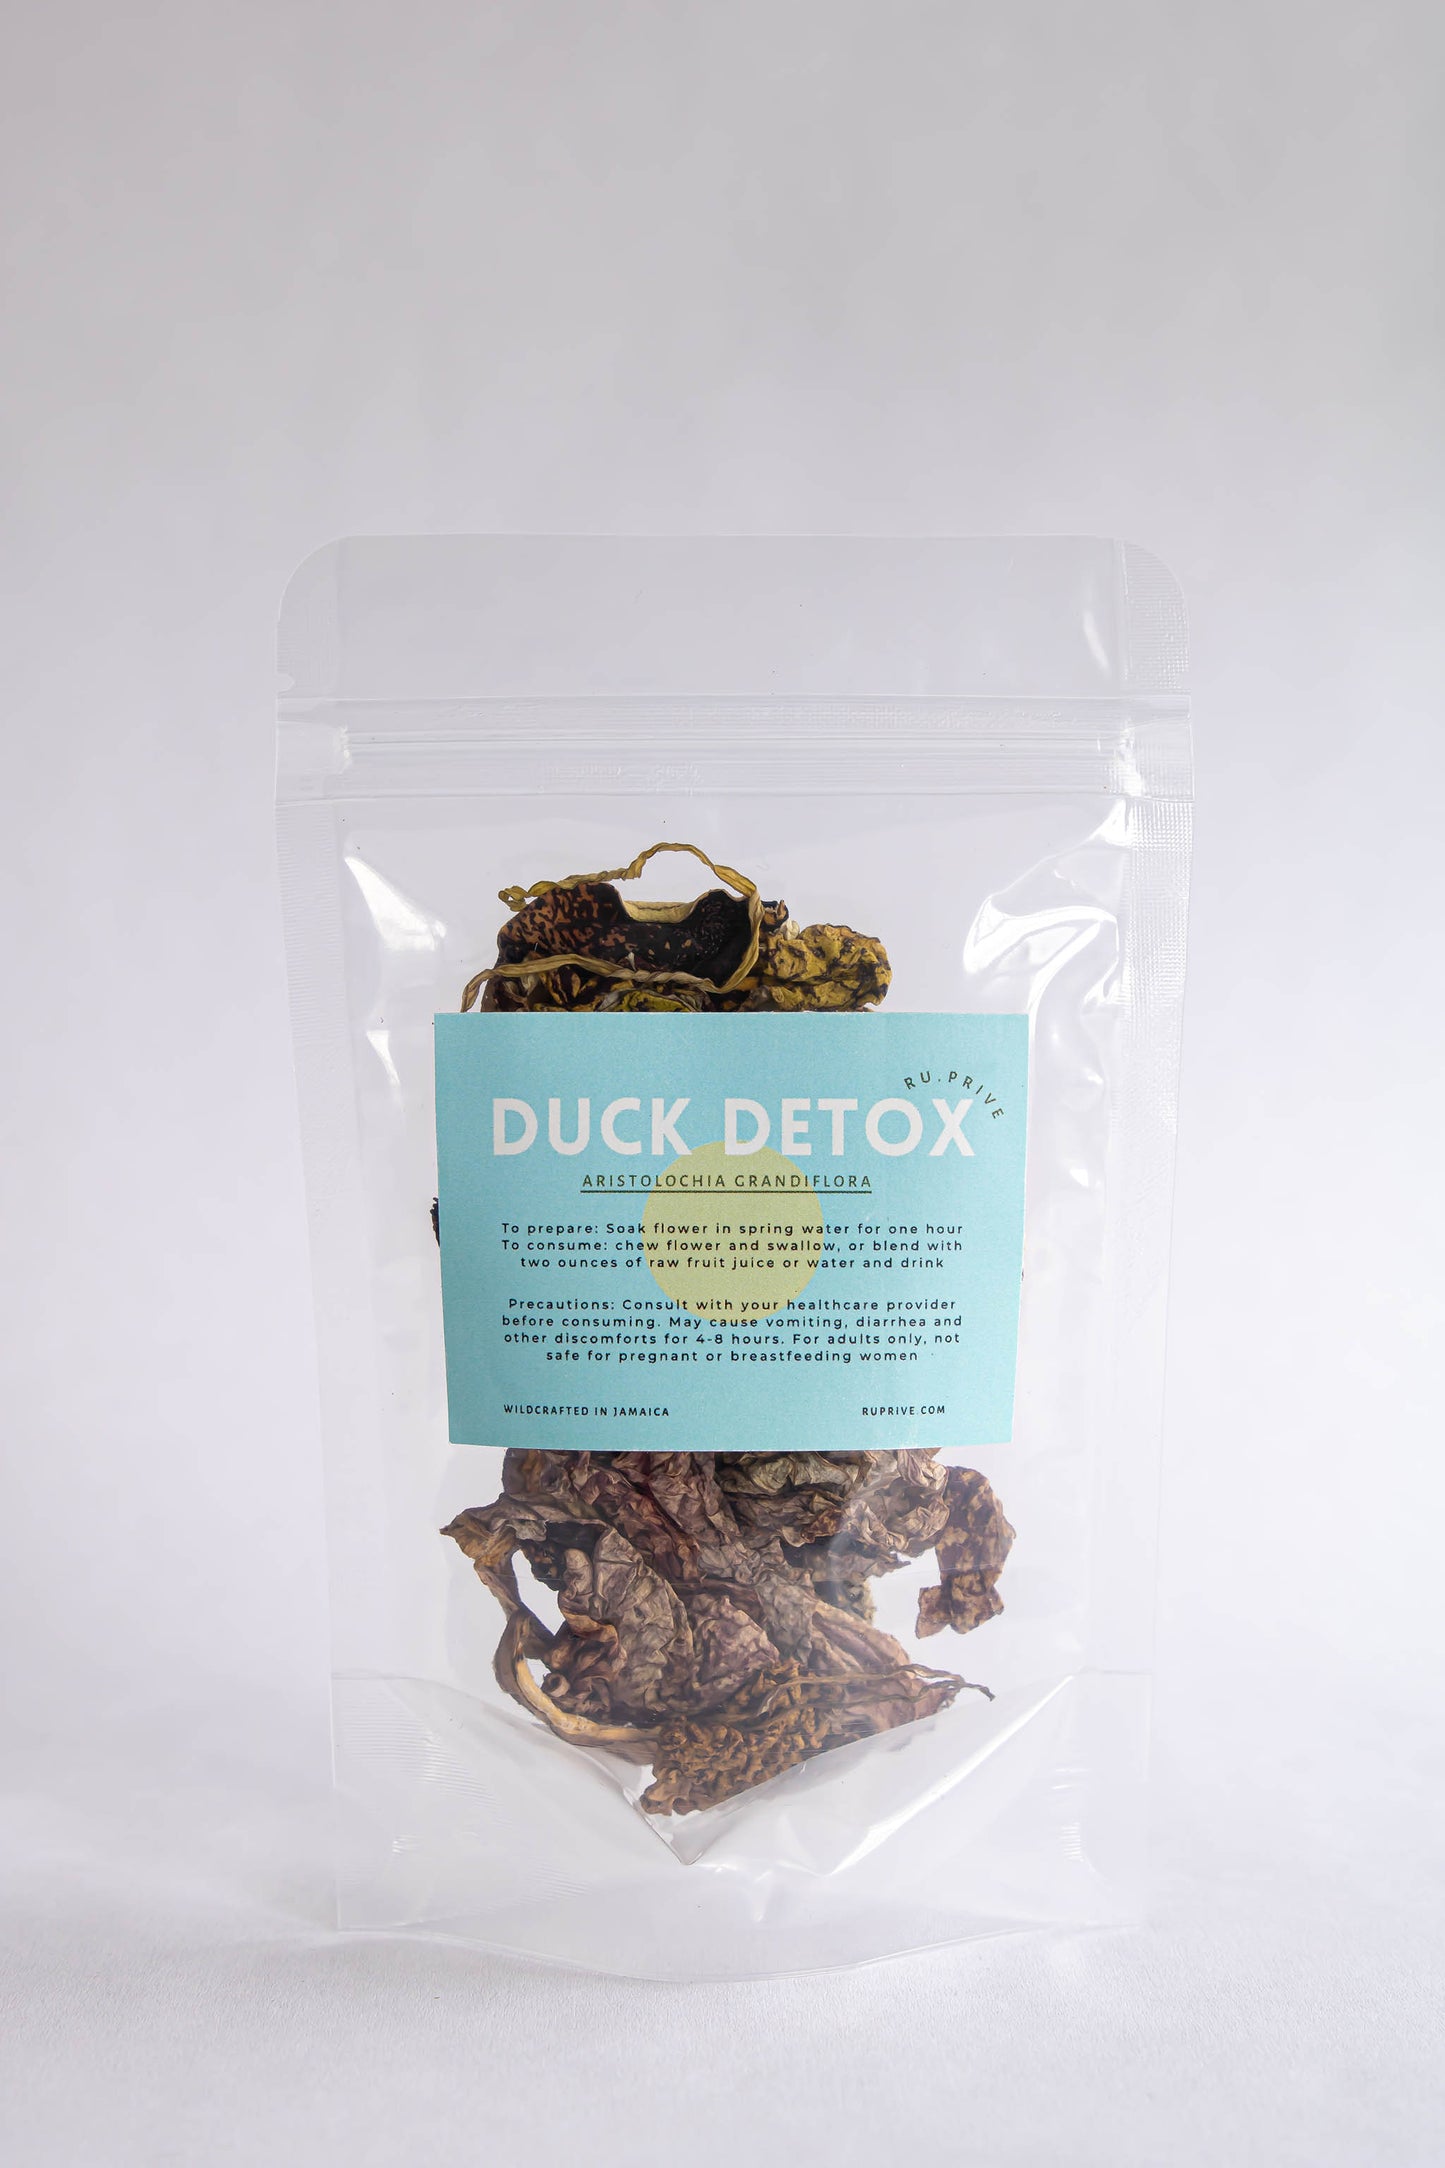 The Duck Flower Detox - Everything You need to know - Uses